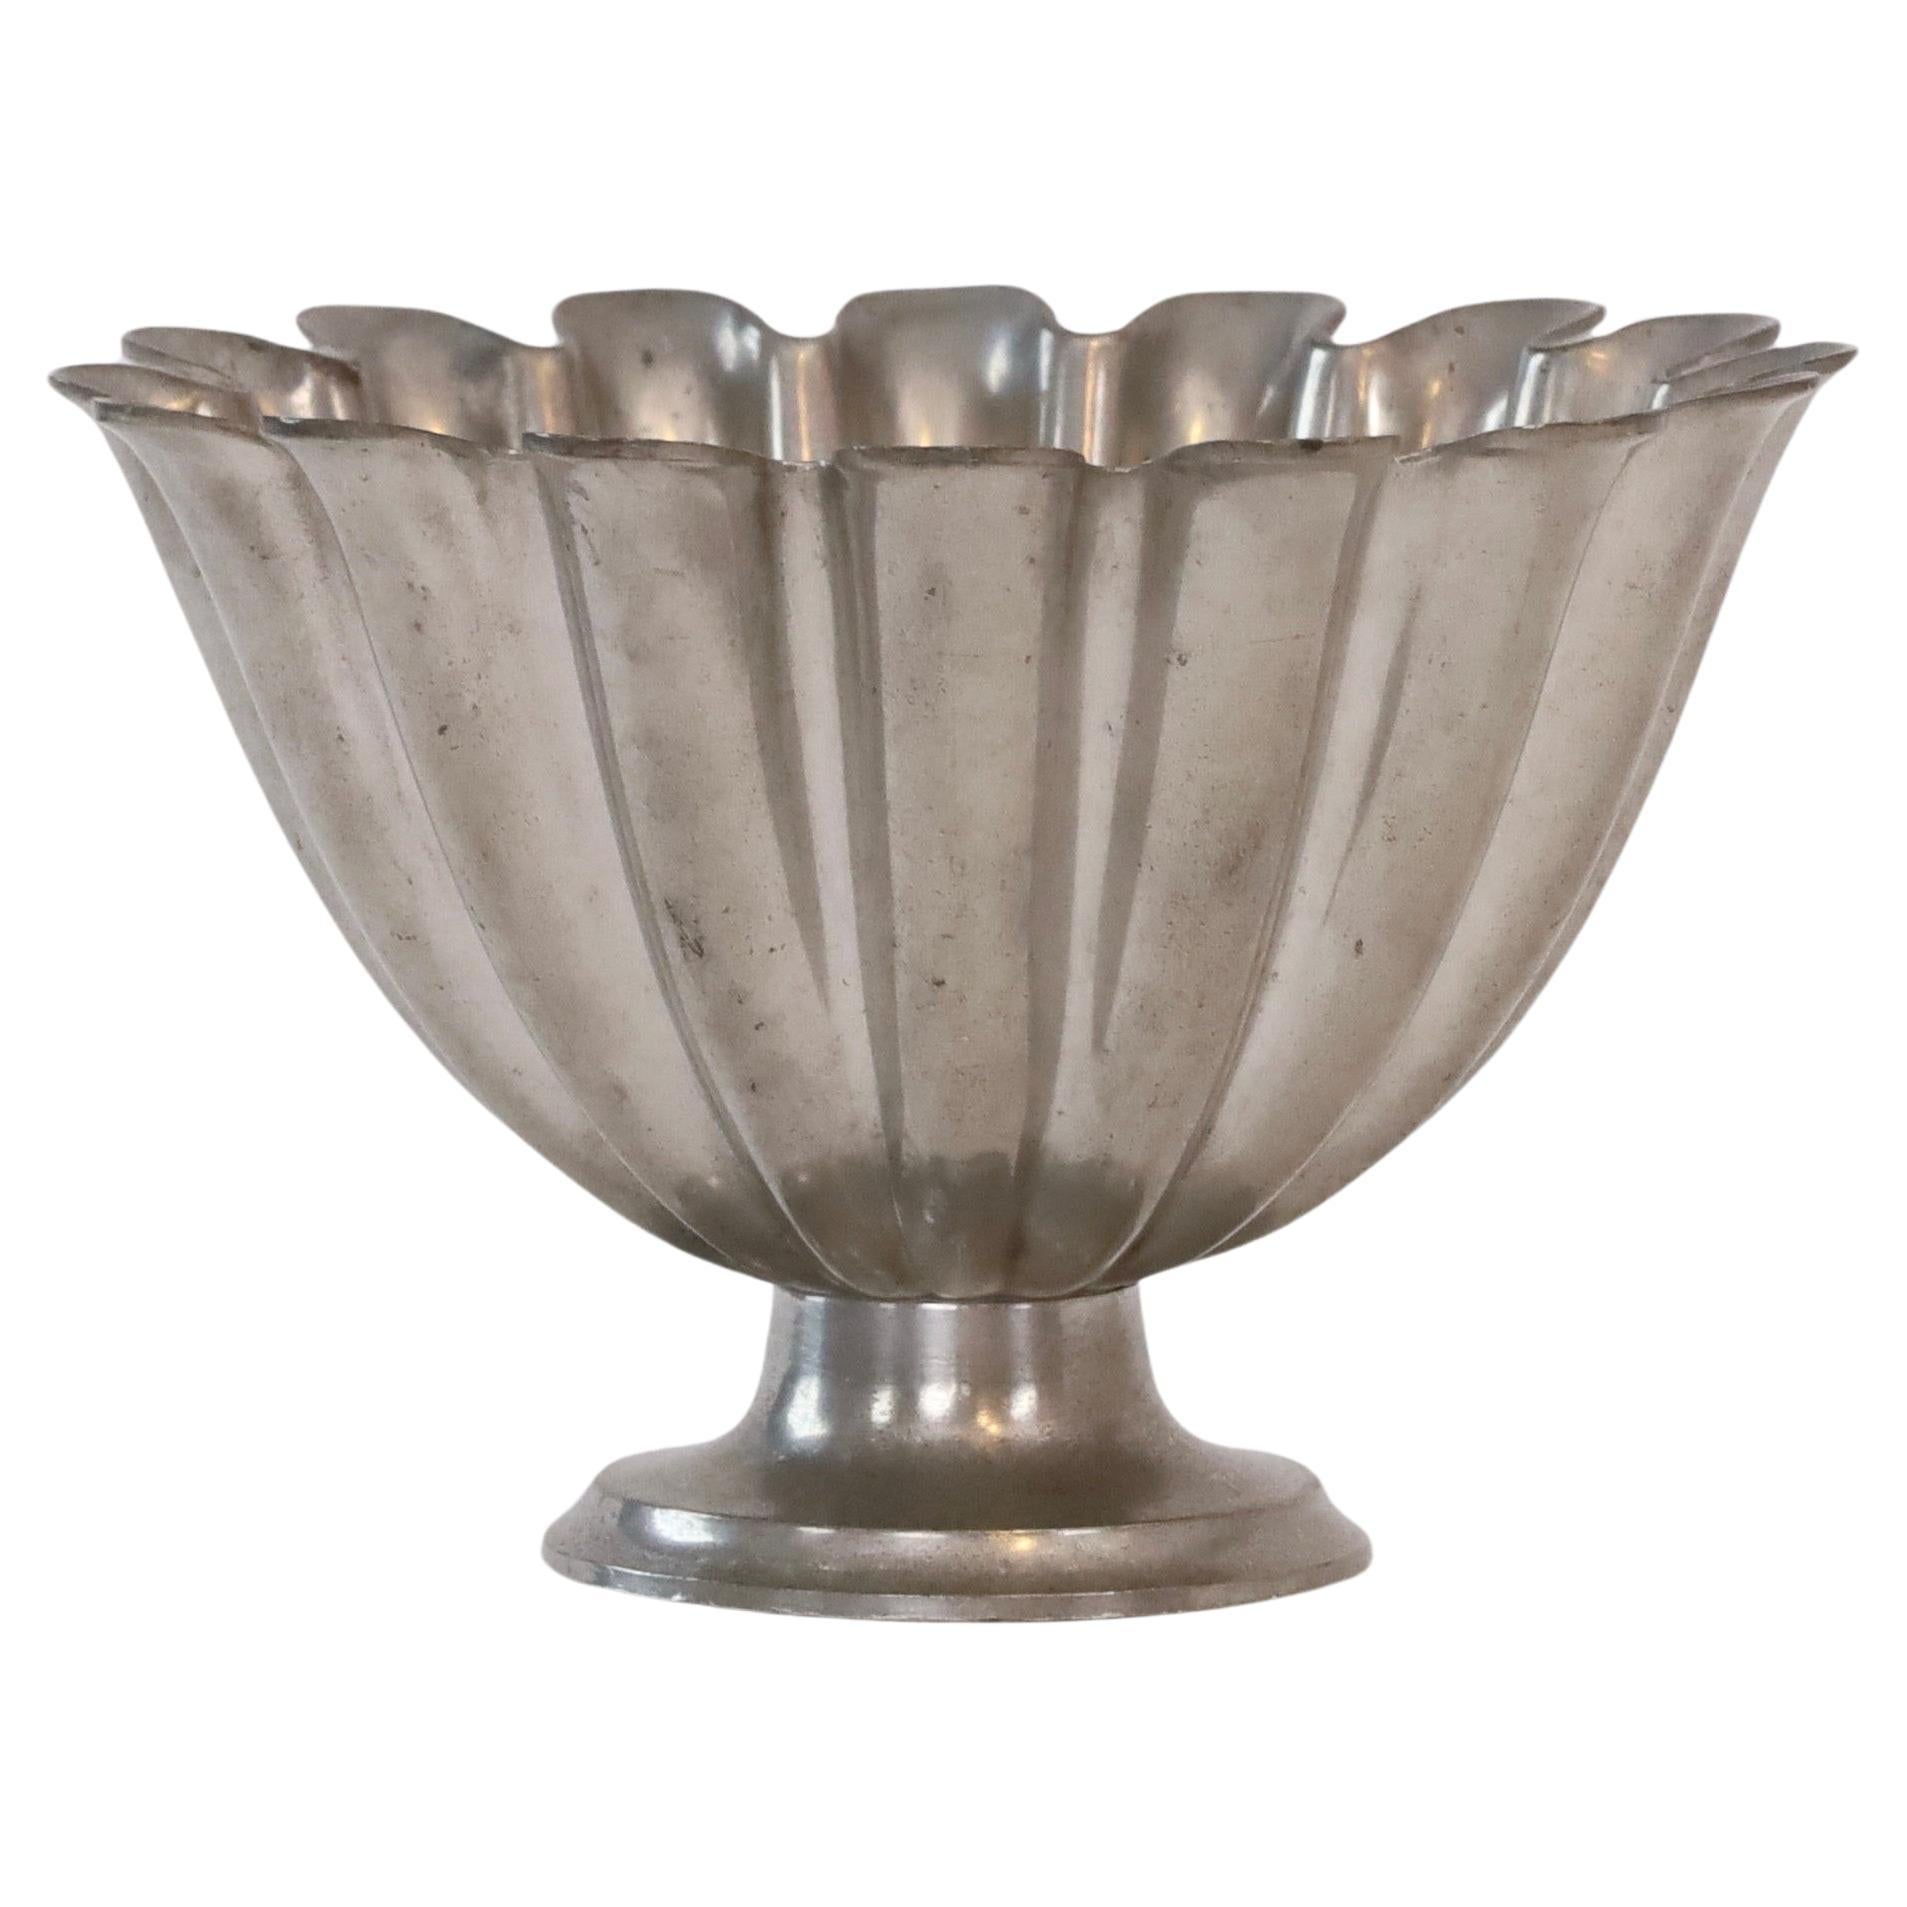 Scalloped pedestal pewter bowl by Just Andersen 1920s, Denmark For Sale